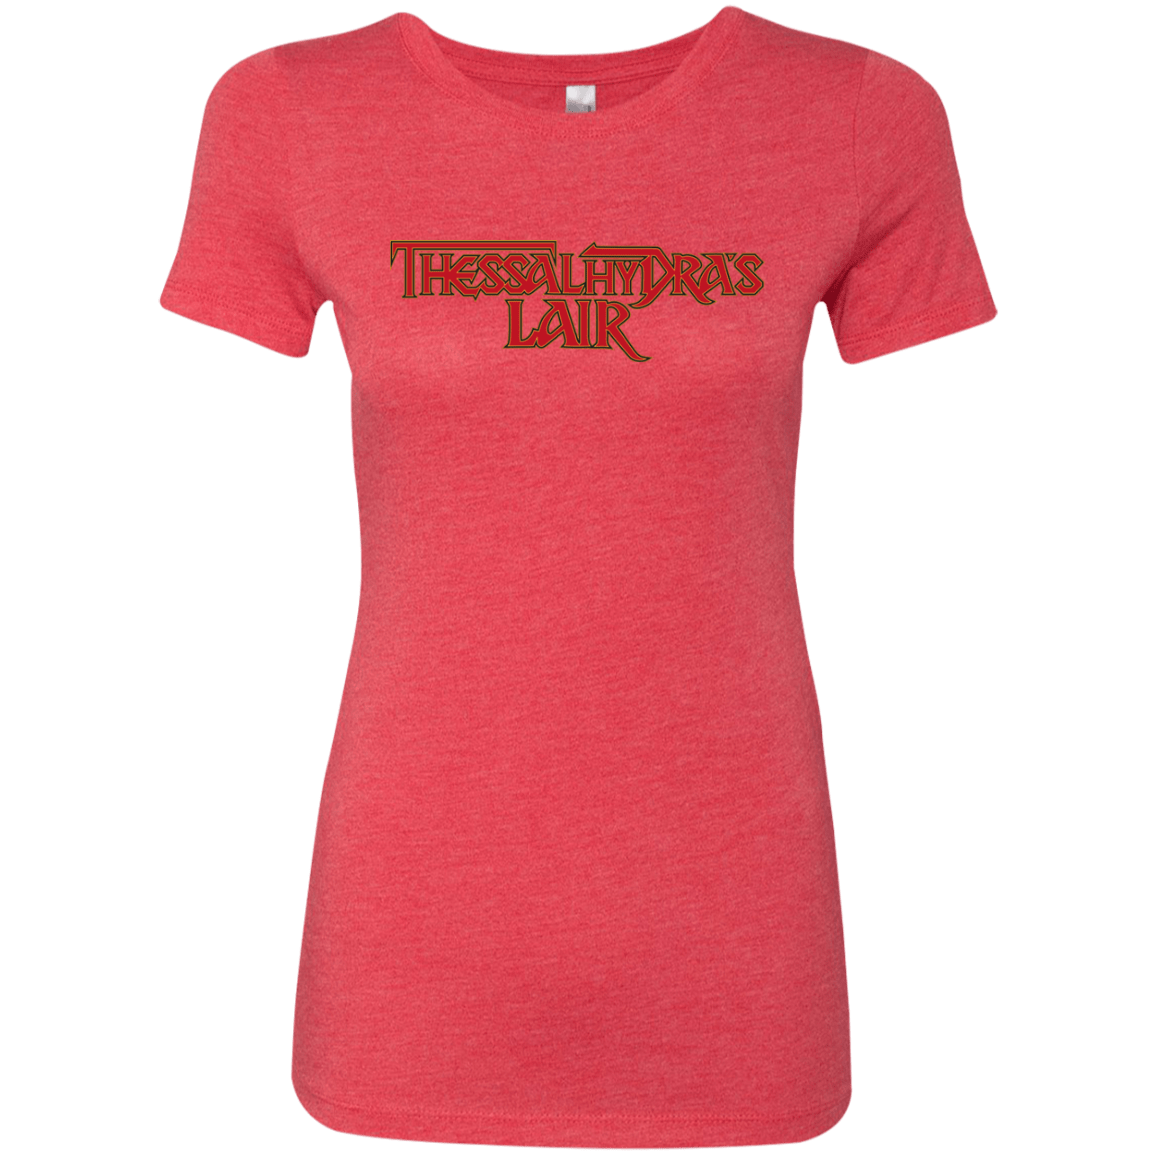 T-Shirts Vintage Red / S Thessalhydras Lair Women's Triblend T-Shirt